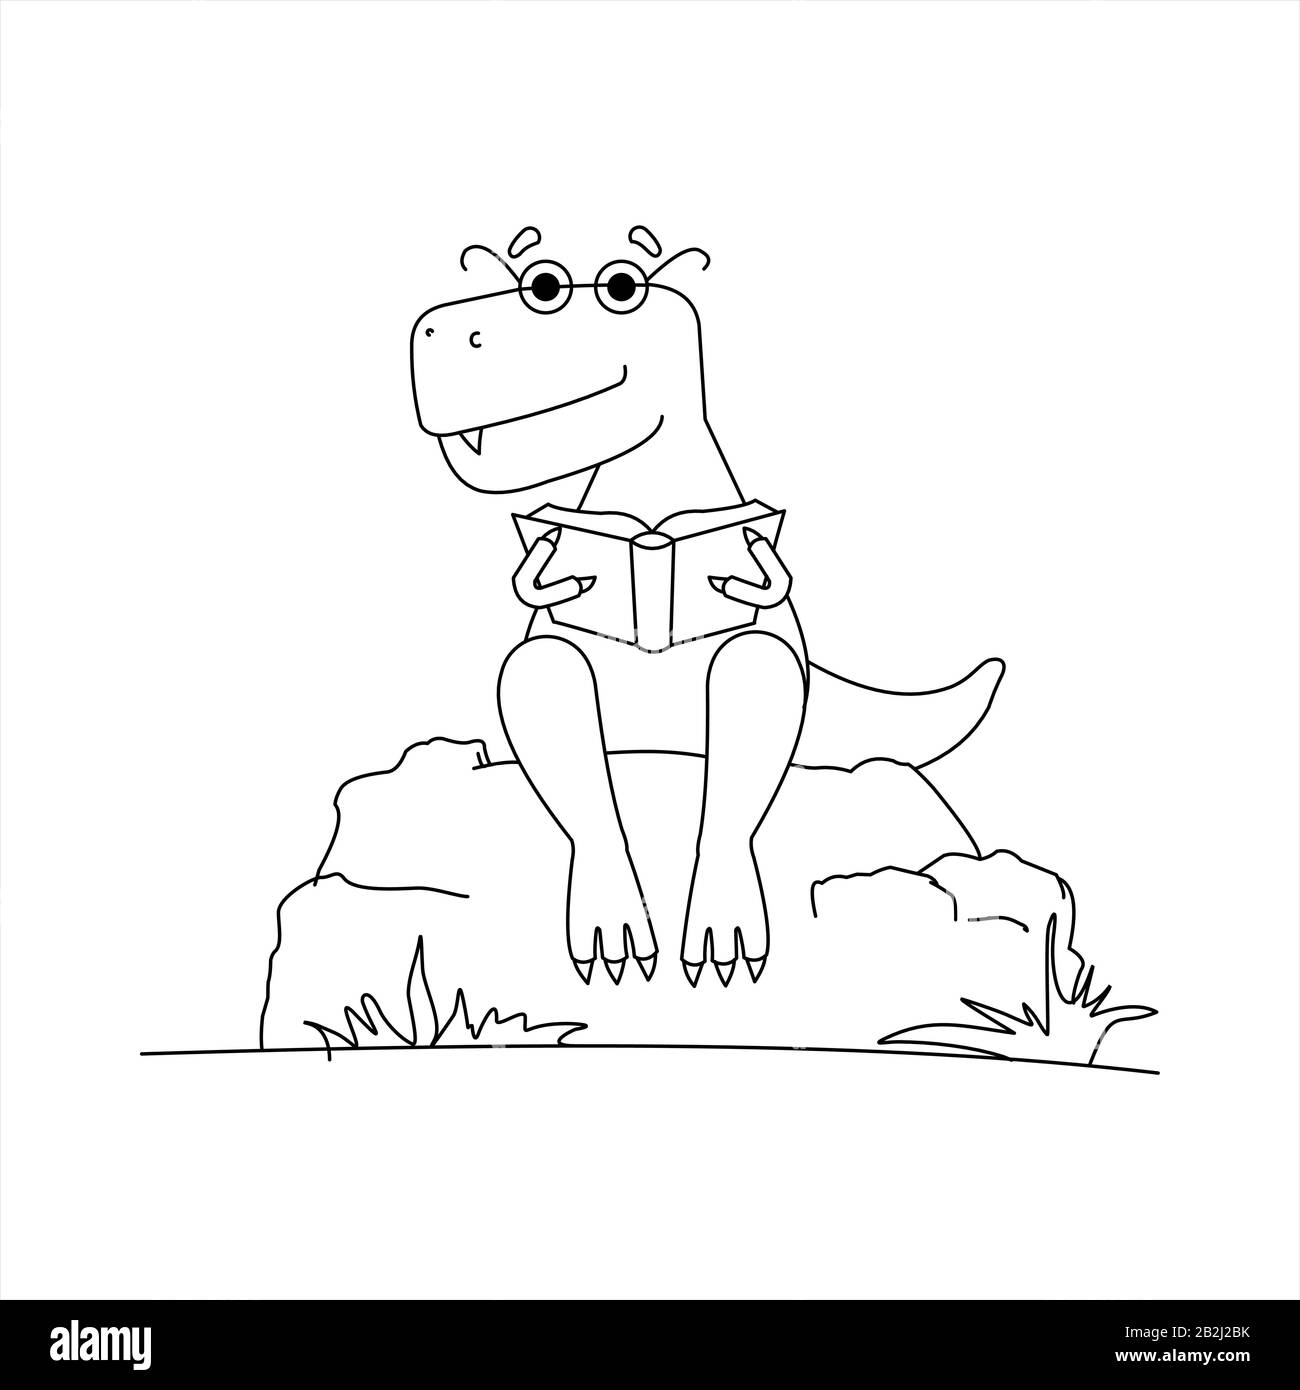 Contour Dinosaur With Glasses Reading a Book. Smart Dinosaur. A Tyrannosaurus In Glasses Sits on a Stone With a Book in its Paws. Vector Image Isolate Stock Vector